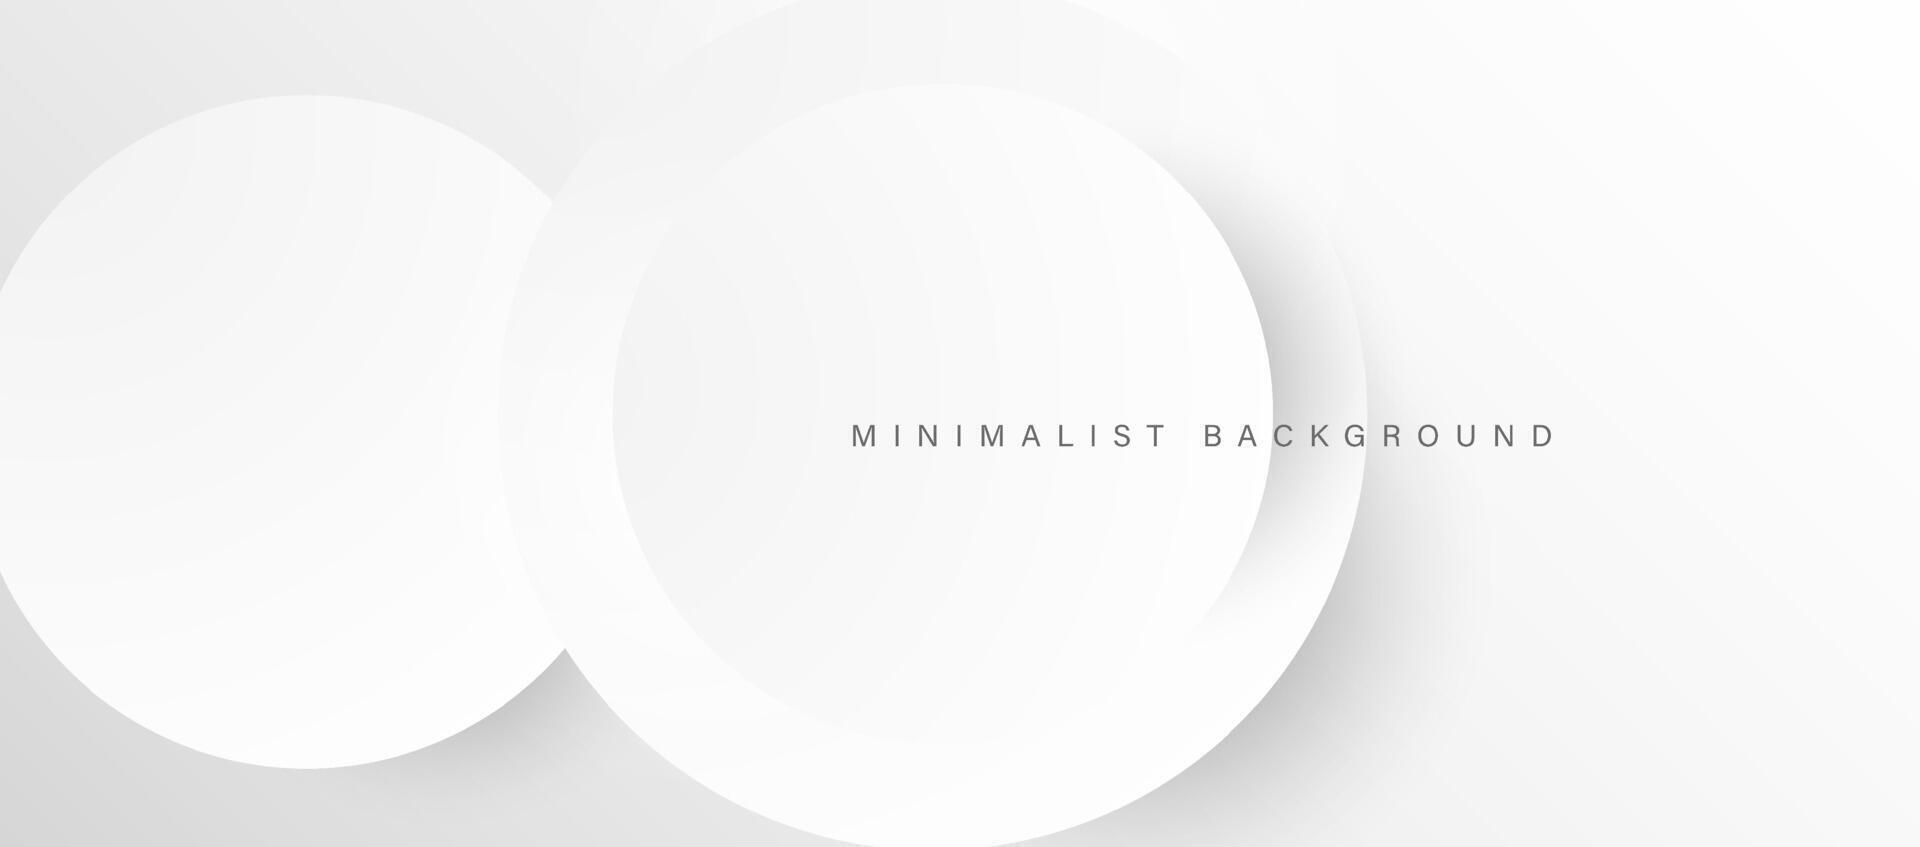 Abstract minimalist white background with circular elements vector. vector